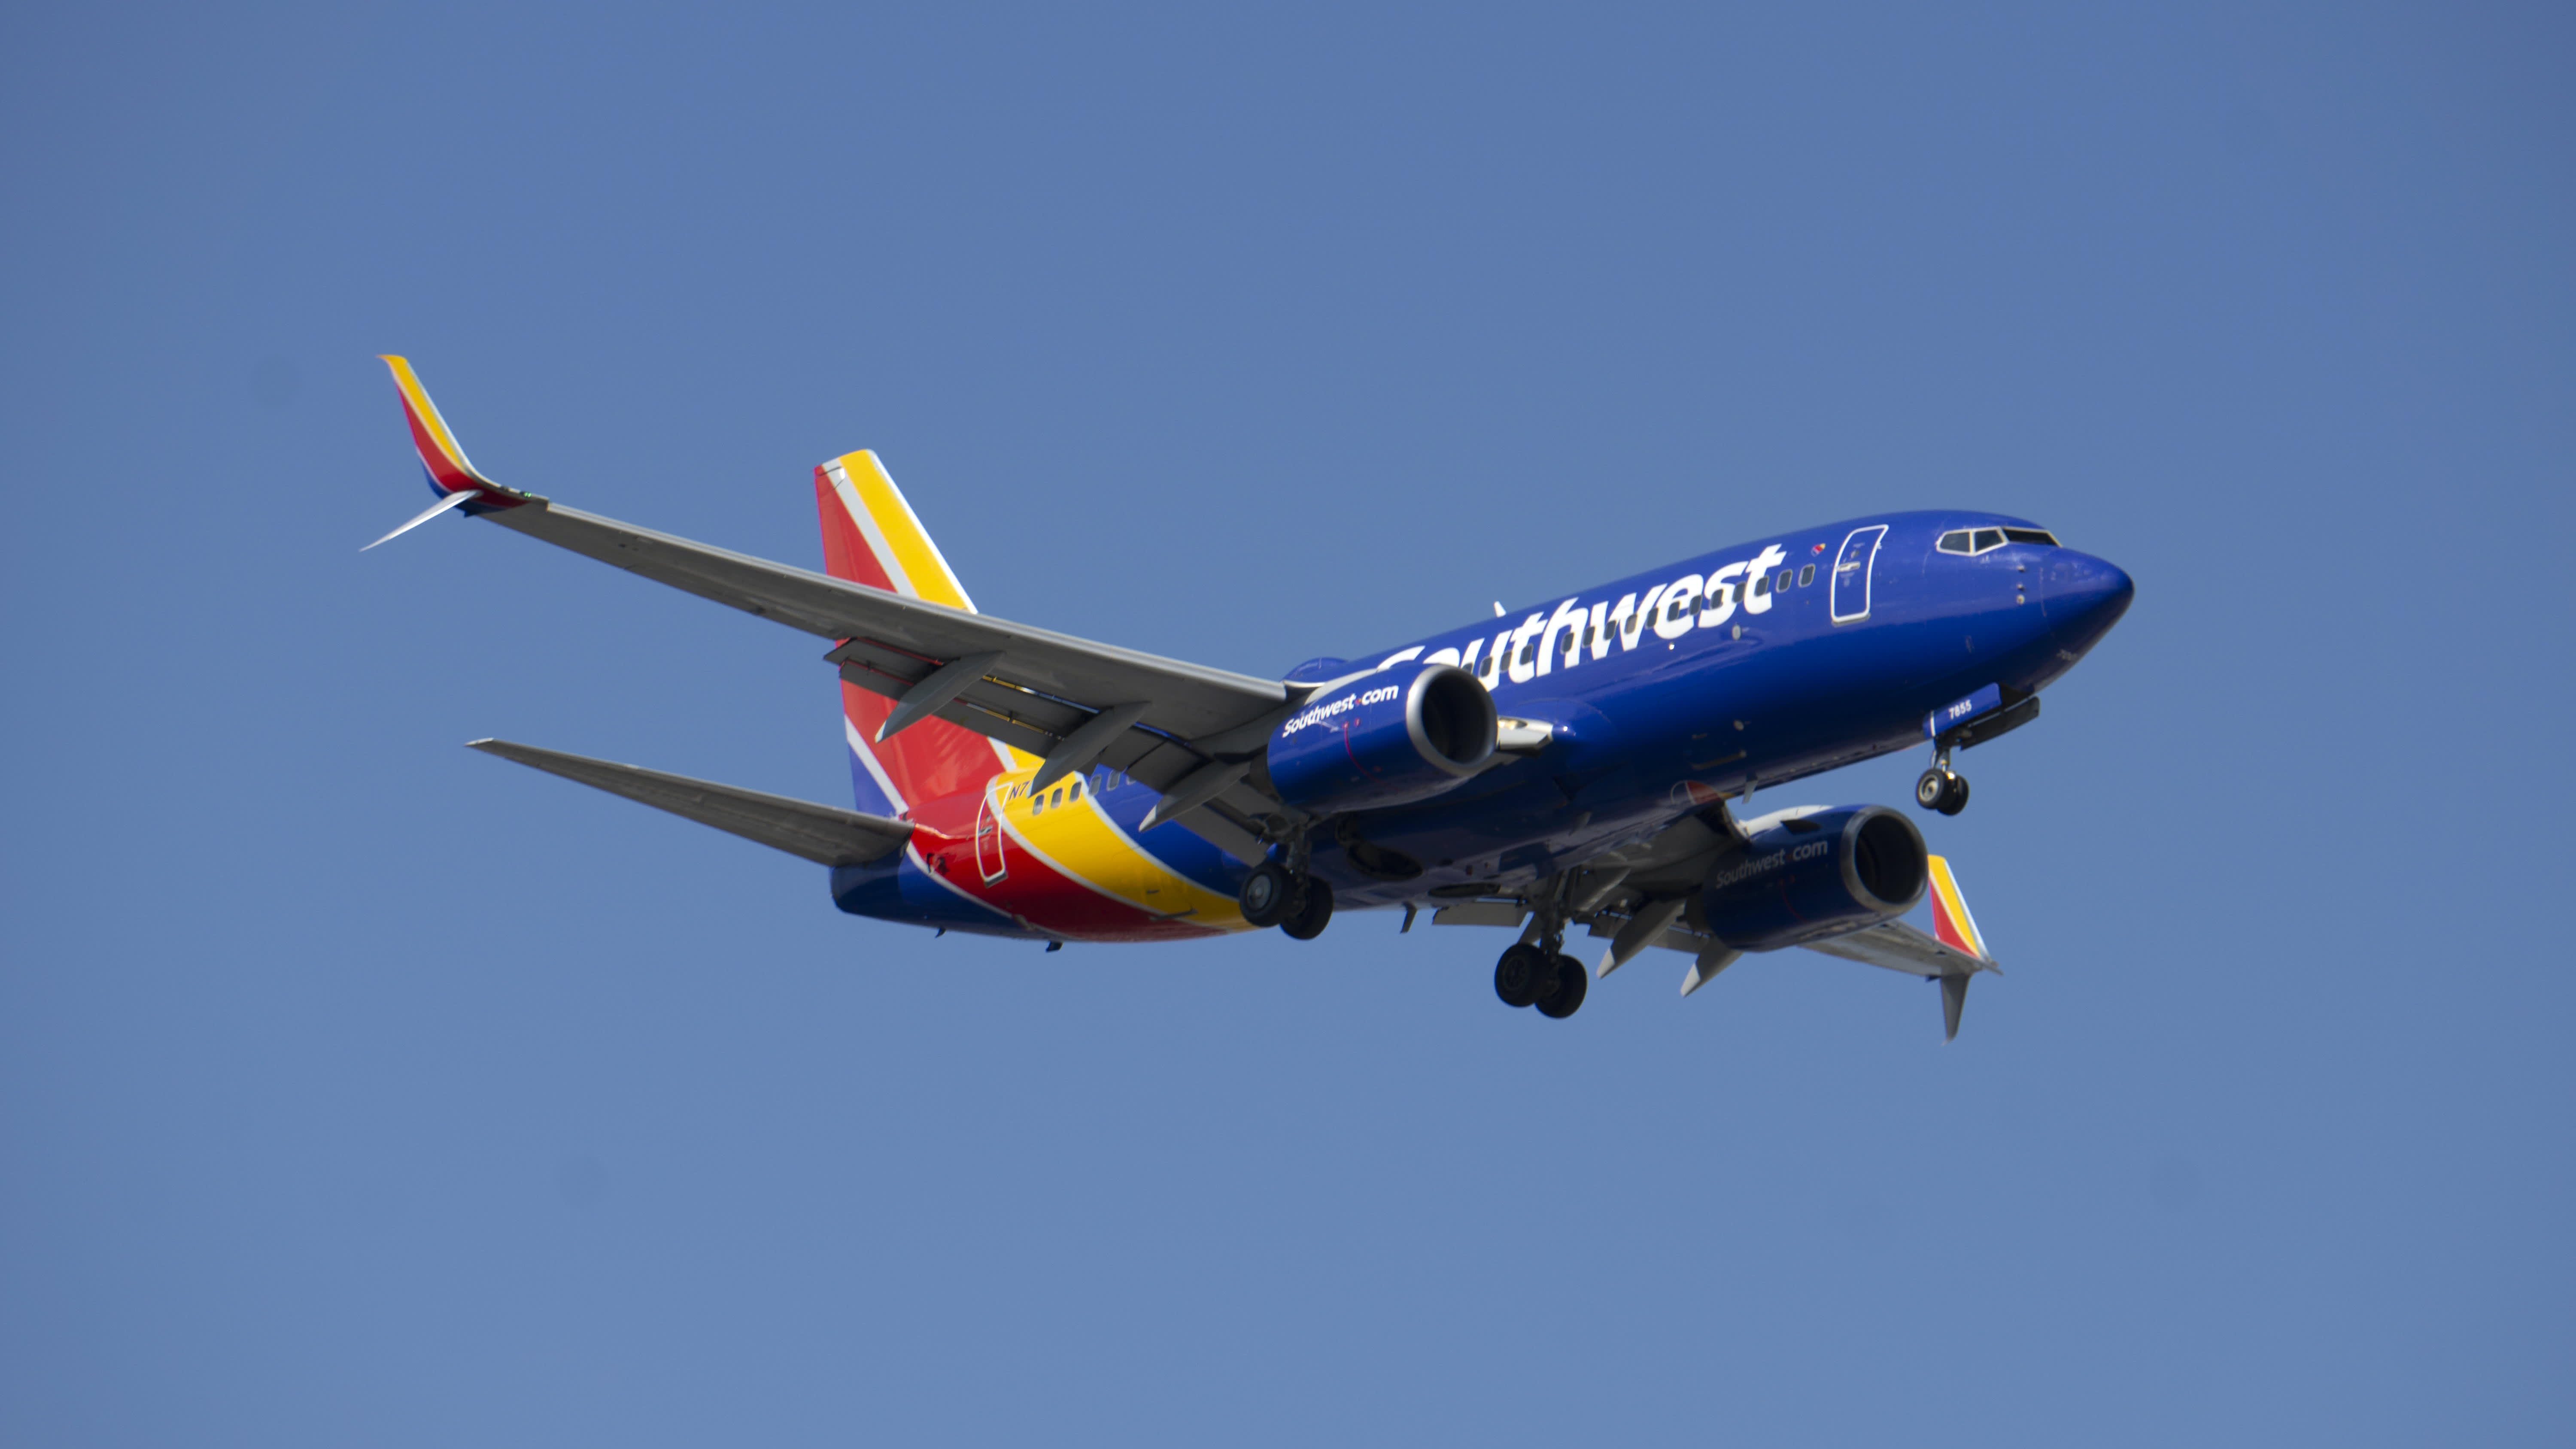 Southwest Airlines says travel demand is improving, forecasts fourth quarter profit